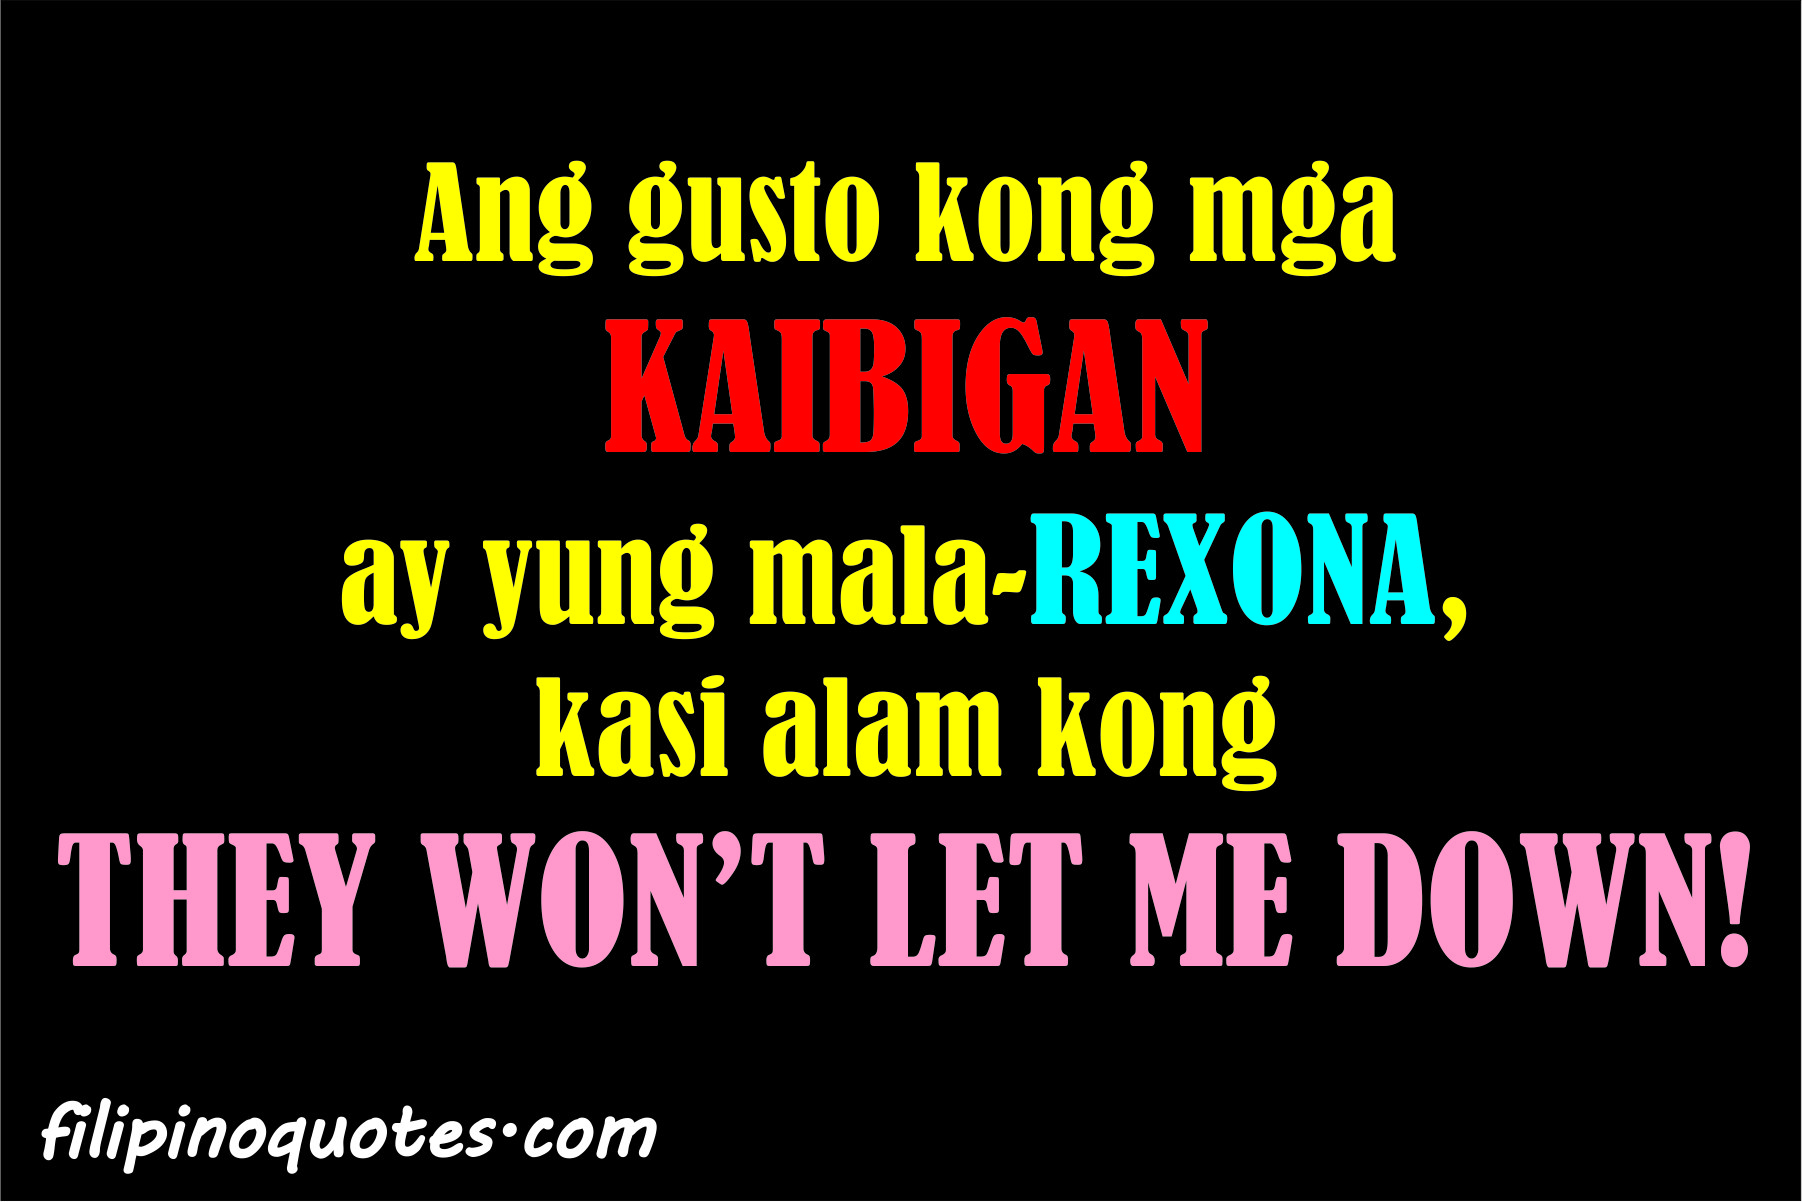 20 Quotes About Friendship Tagalog With Images QuotesBae